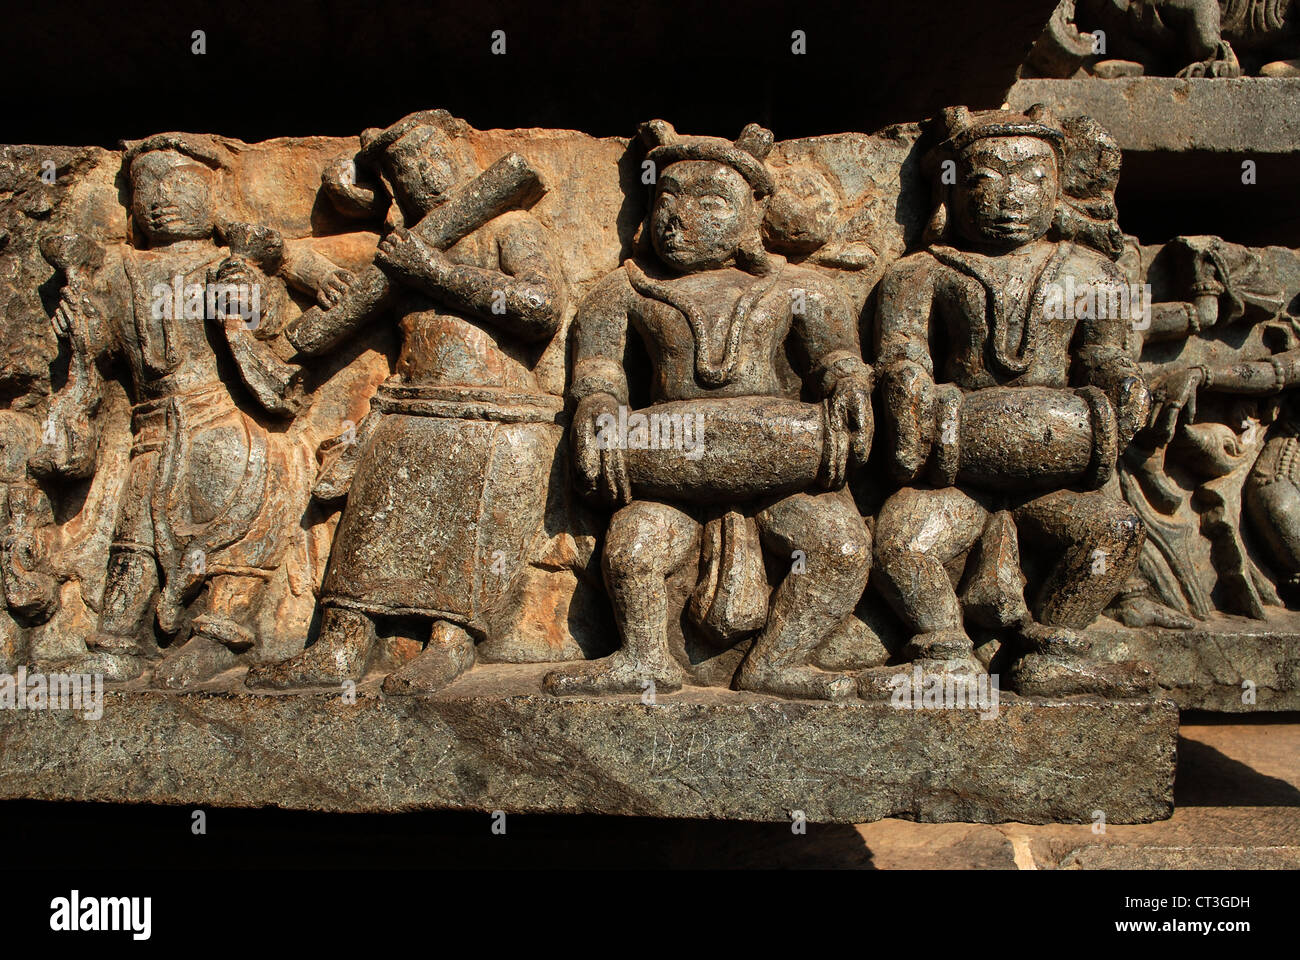 gods playing musical instruments ; a stone carving from a hindu temple ...